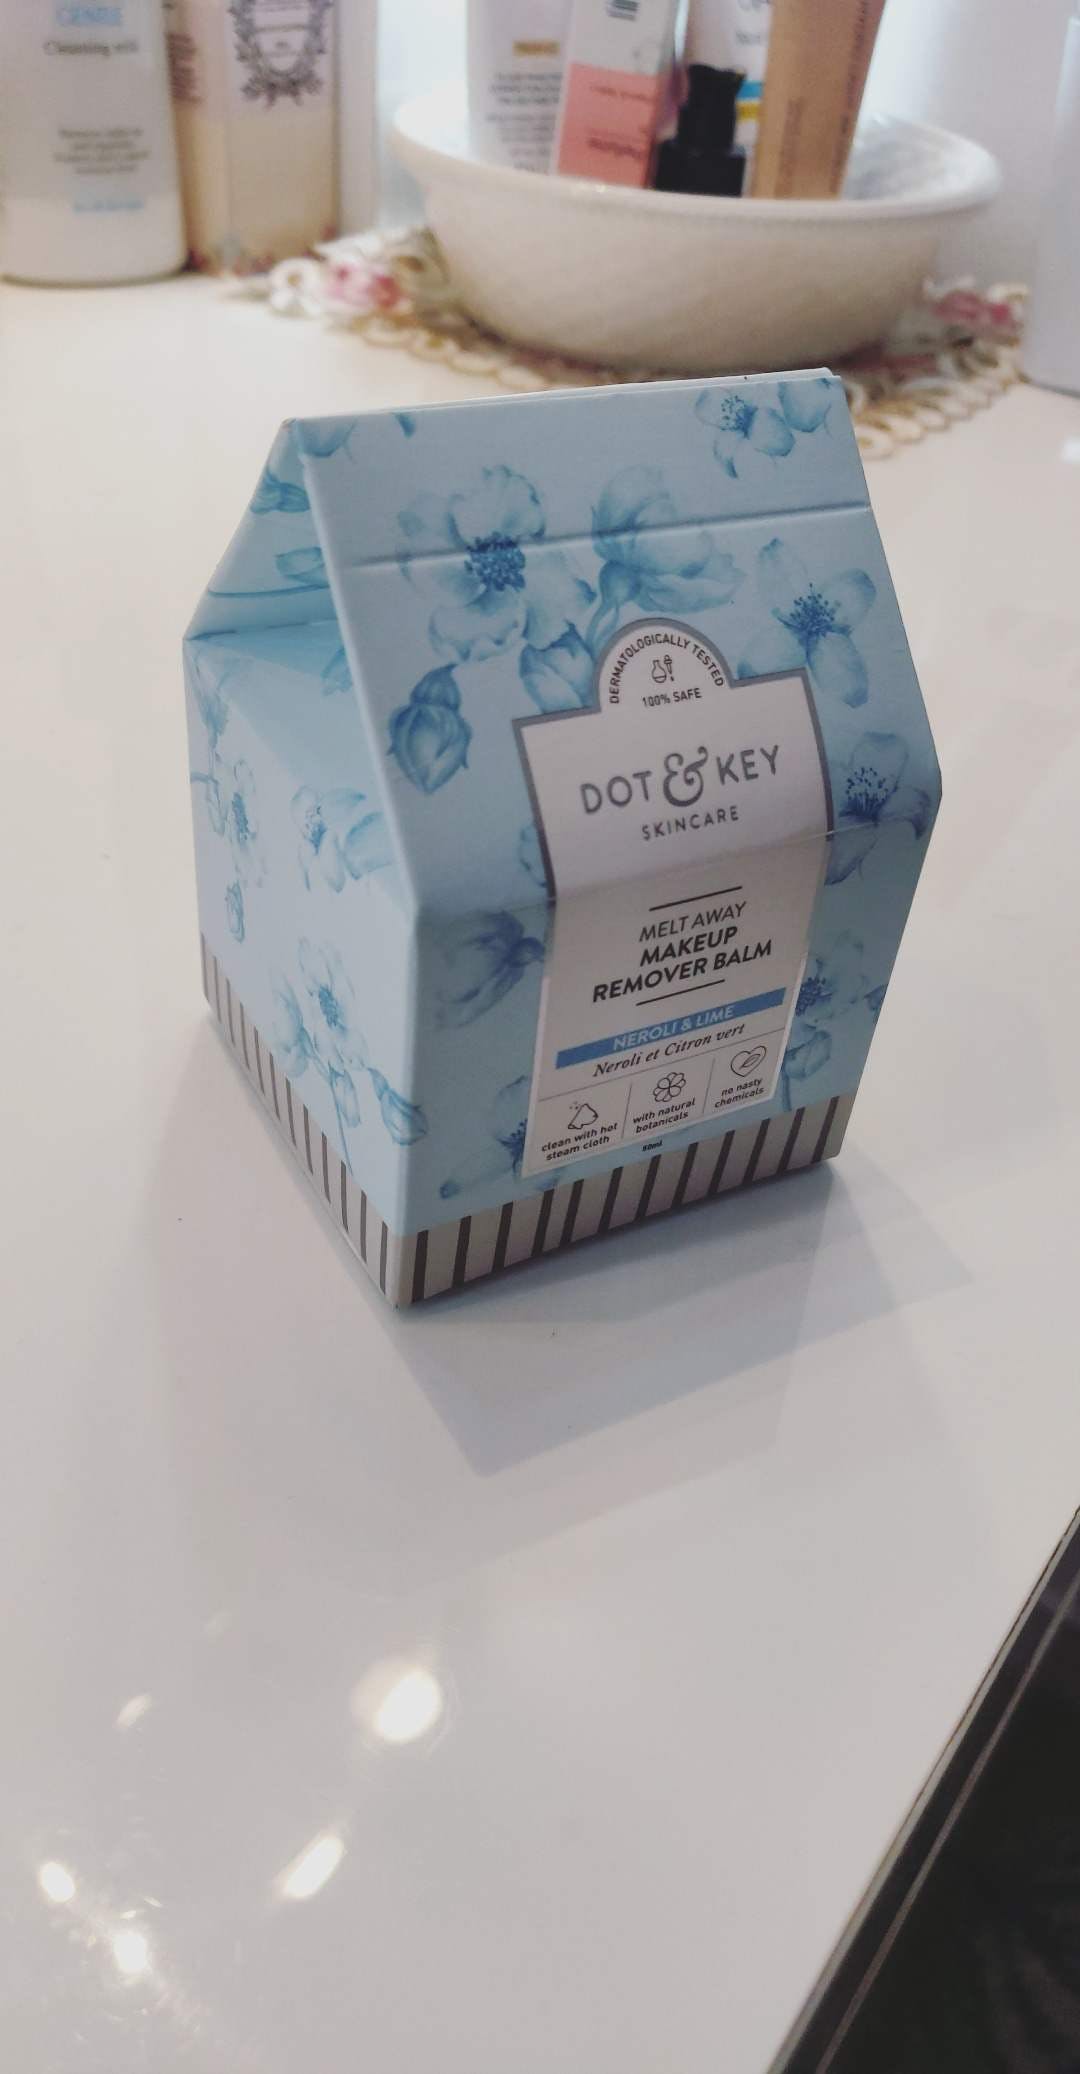 Blue,Box,Party favor,Carton,Packaging and labeling